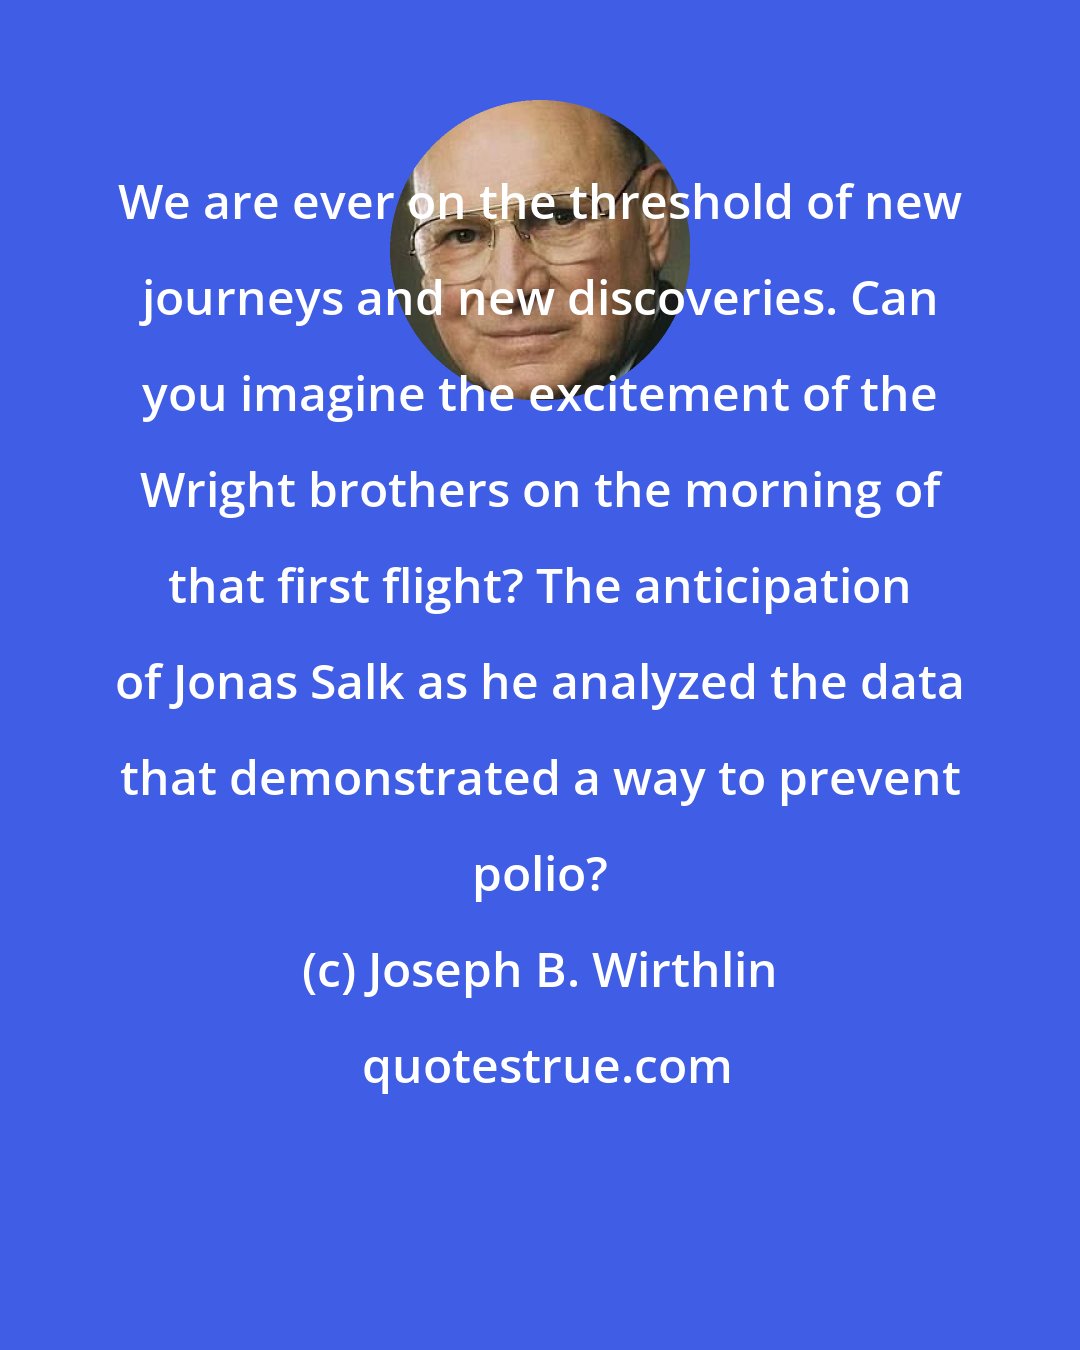 Joseph B. Wirthlin: We are ever on the threshold of new journeys and new discoveries. Can you imagine the excitement of the Wright brothers on the morning of that first flight? The anticipation of Jonas Salk as he analyzed the data that demonstrated a way to prevent polio?